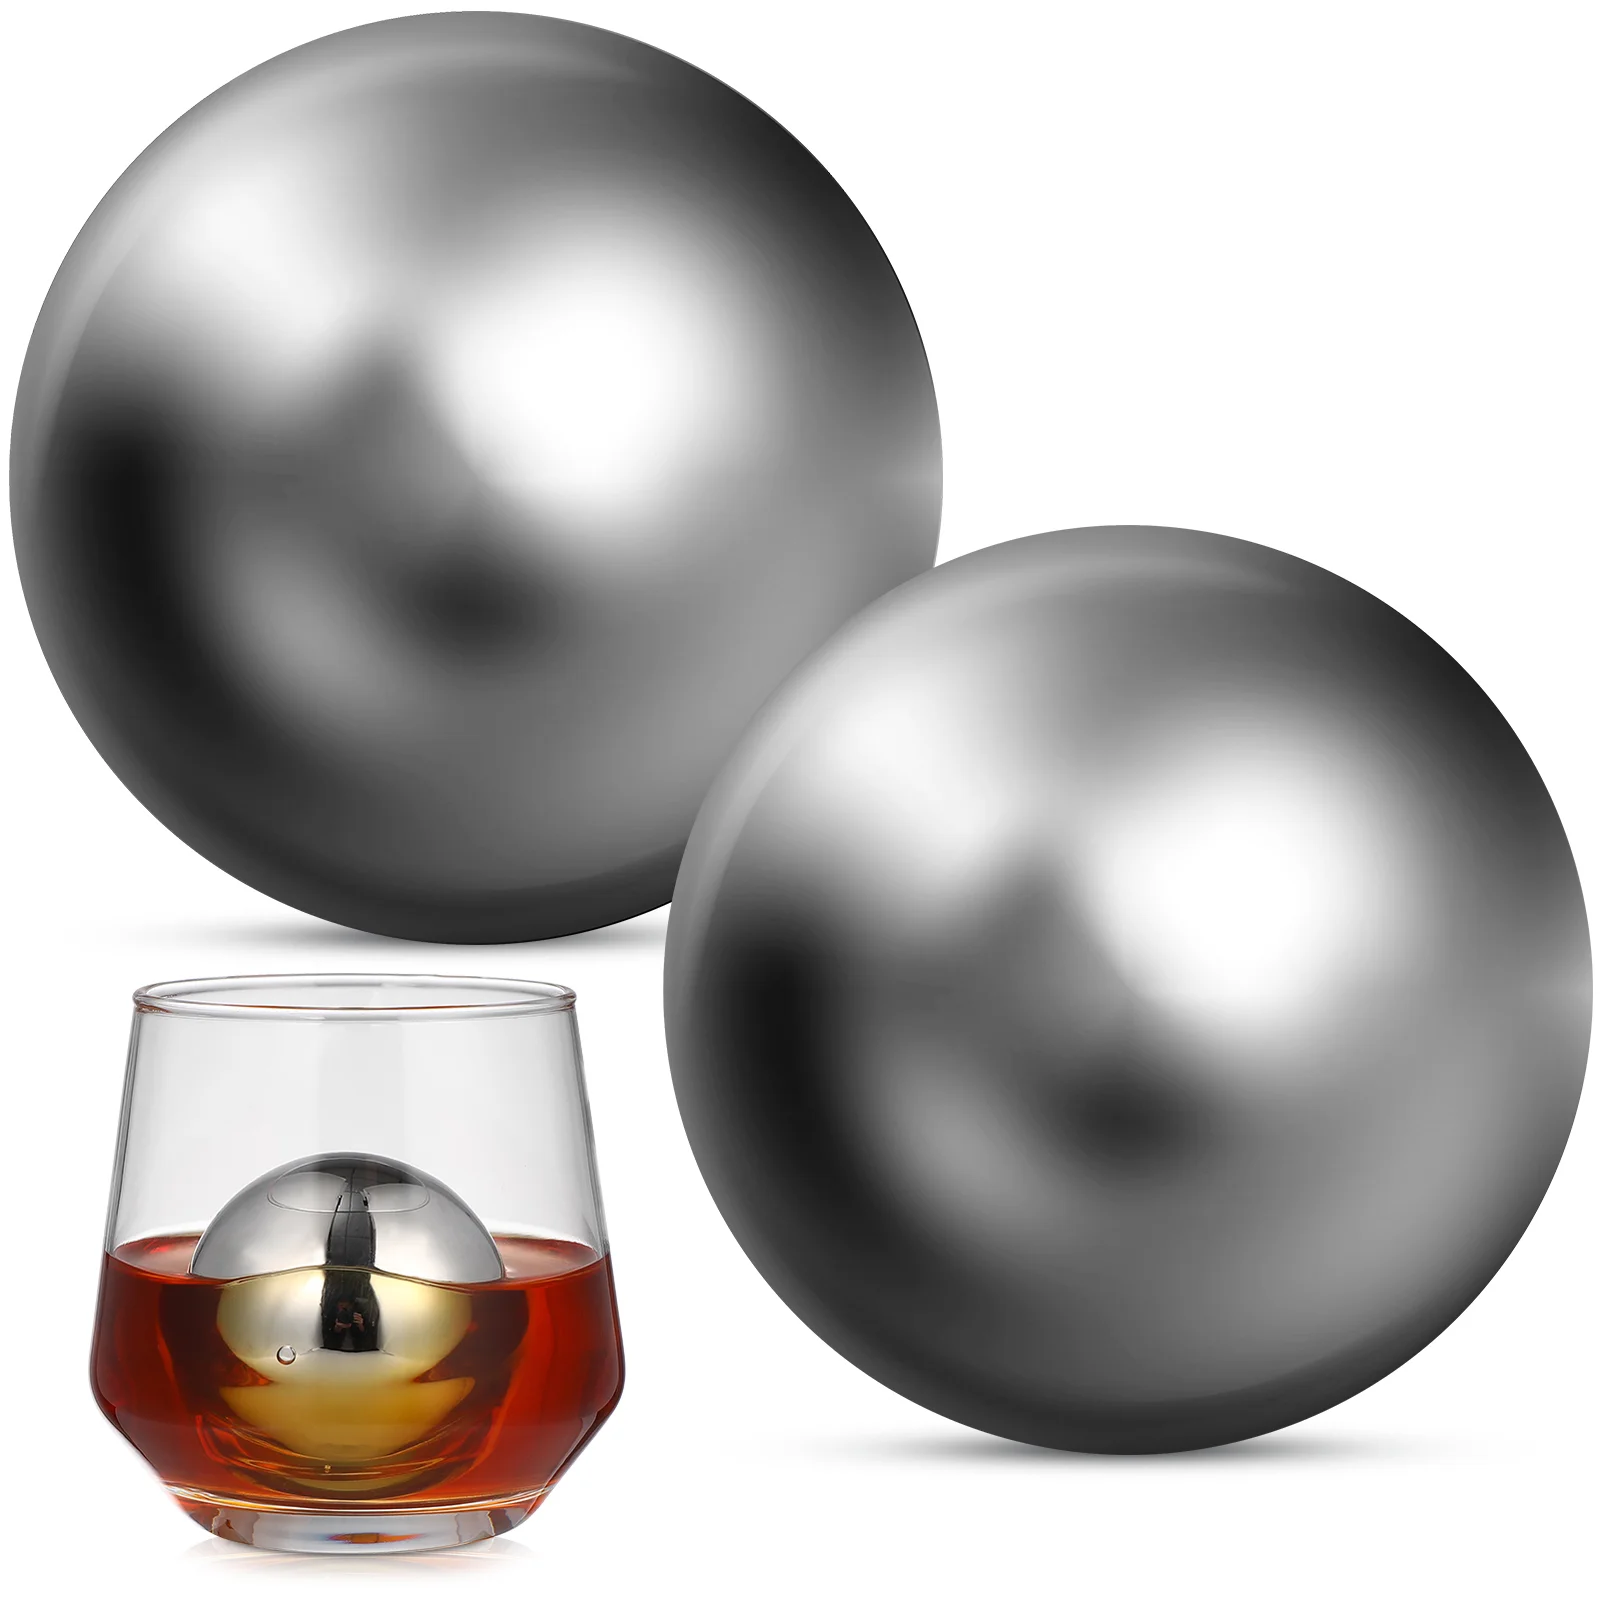 

Ice Whiskey Steel Stainless Cubes Stones Cube Reusable Metal Whisky Drinks Gift Set Spheres Stone Mold Chilling Gifts Men Beer